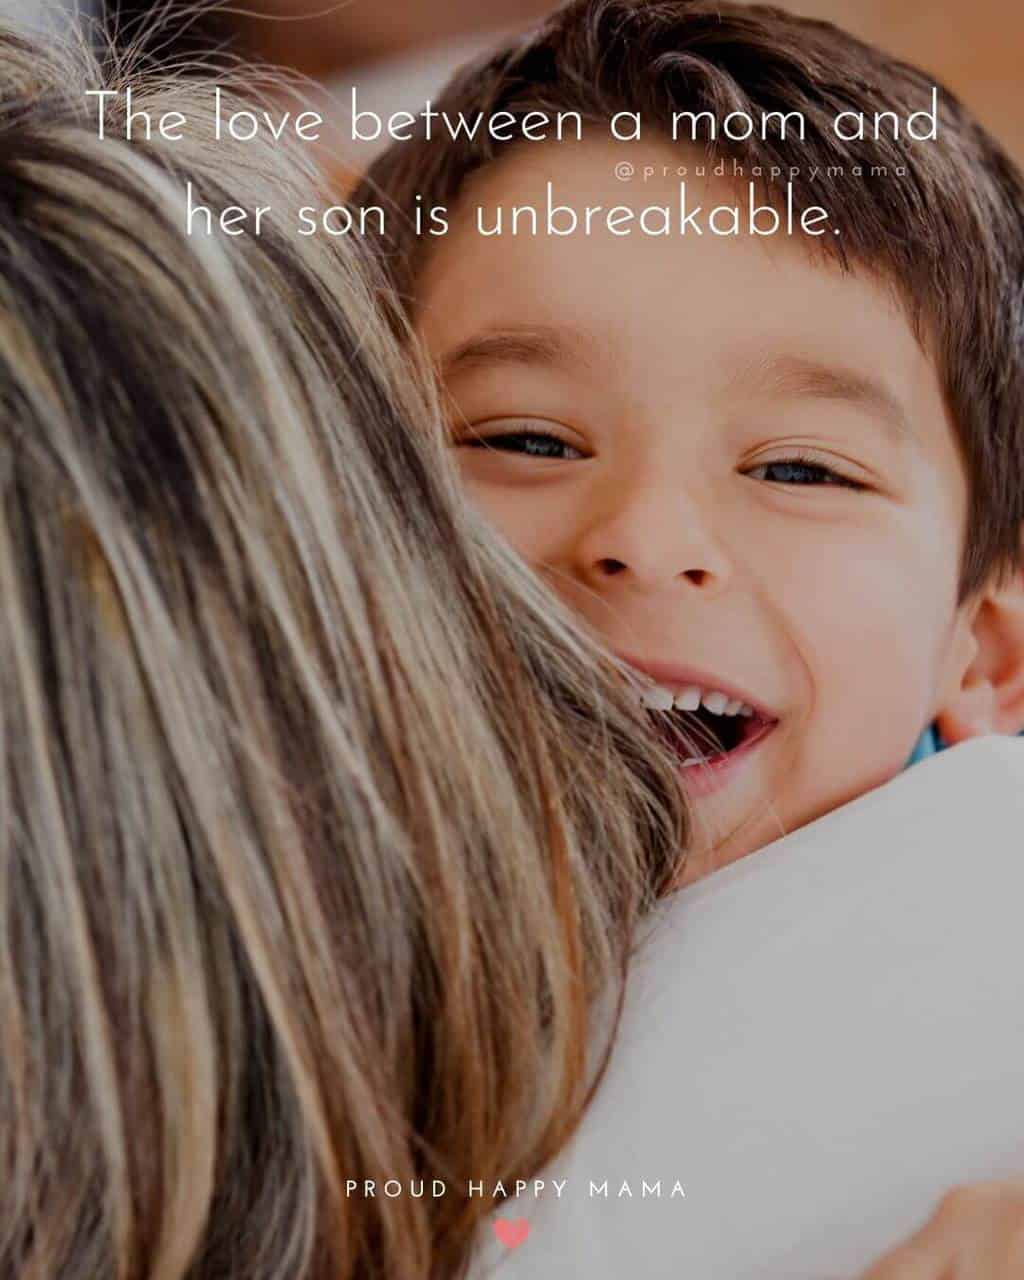 Mothers Day Quotes For Cards | The love between a mom and her son is unbreakable.